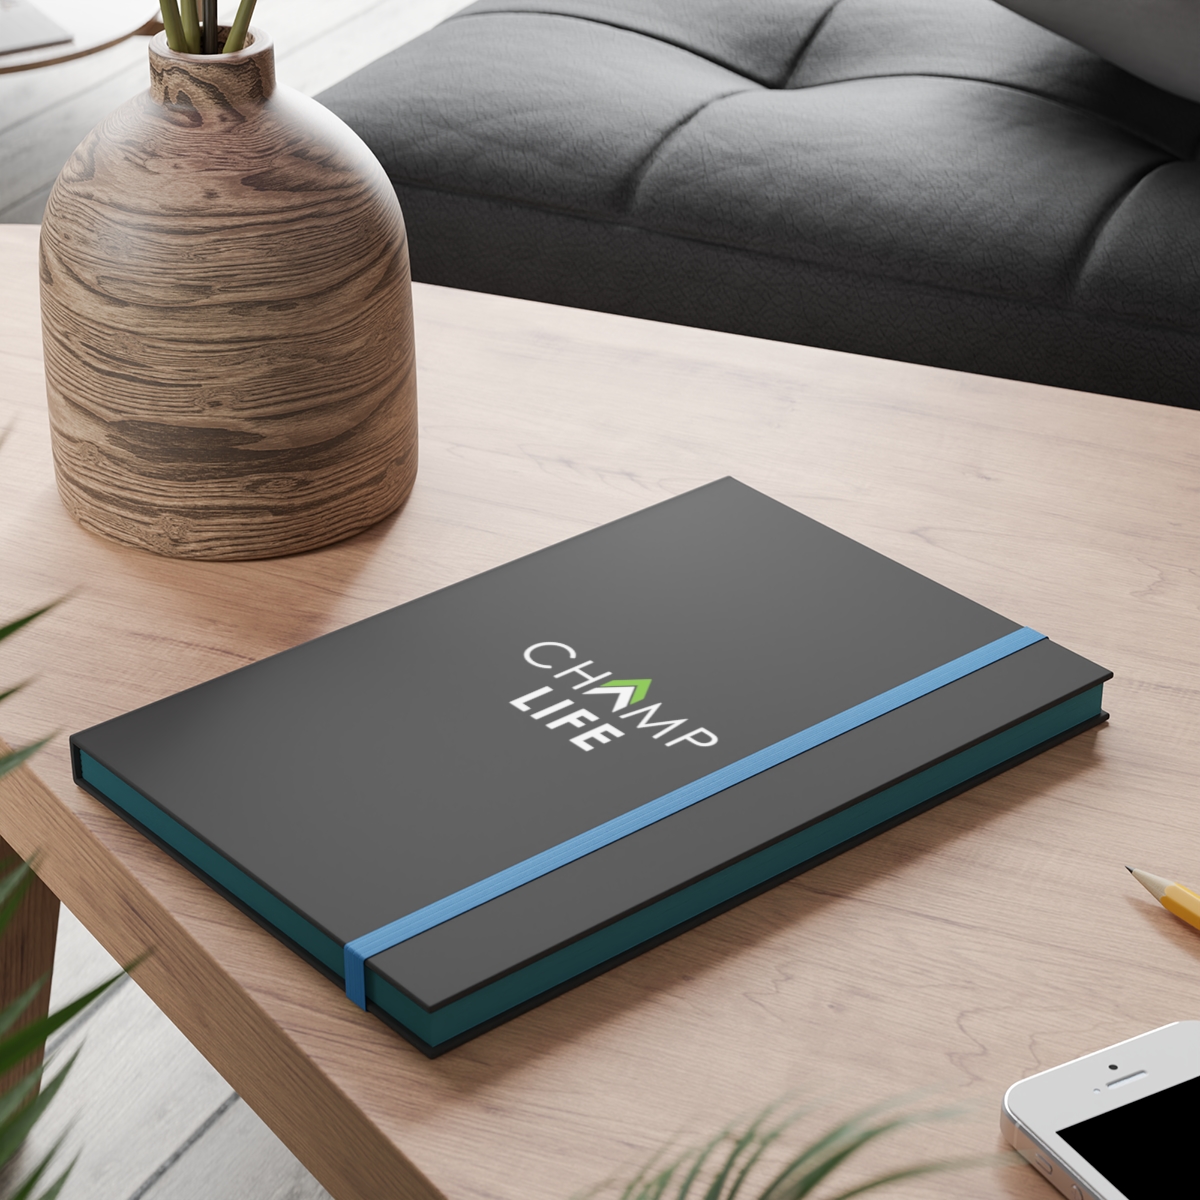 Color Contrast Notebook - Ruled product thumbnail image